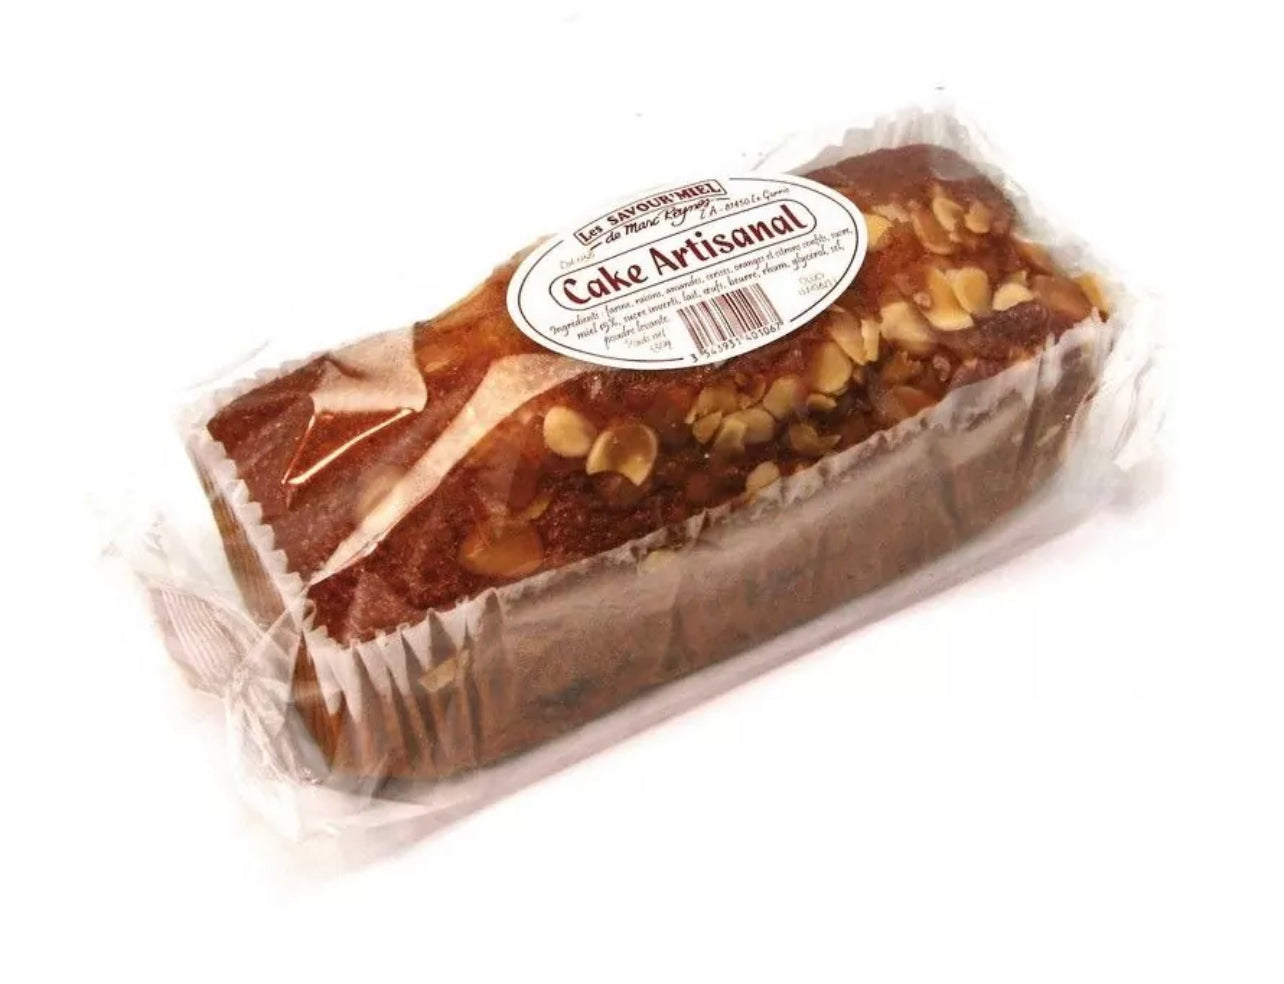 Artisanal cake with candied fruit and almond honey - 330g